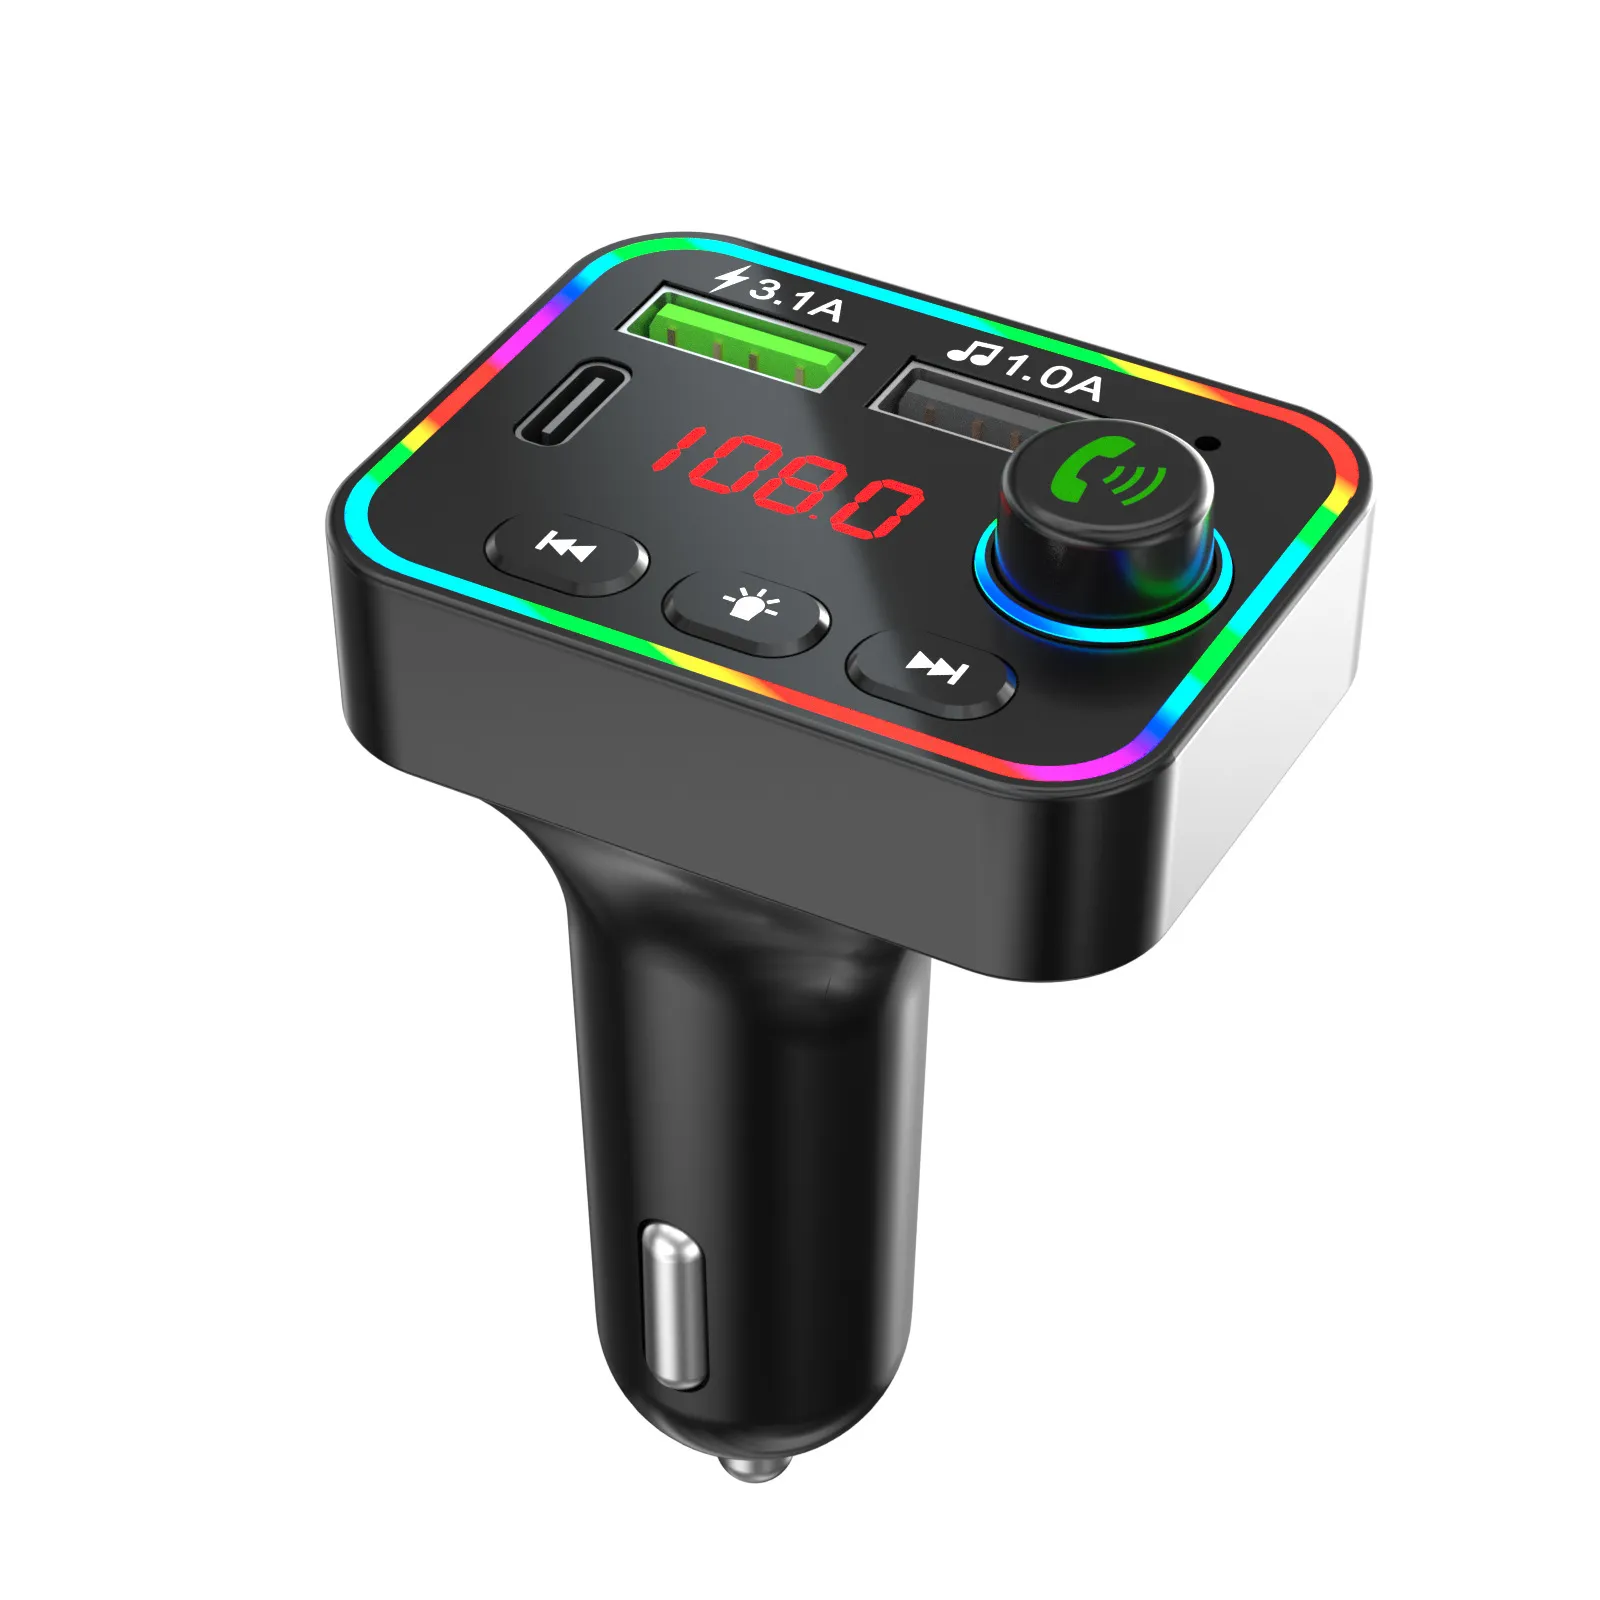 F4 Bluetooth Kit Car Kit FM Trasmettitore MP3 MUISC Player Handsfree wireless PD Charger rapido 3.1a Supporto TF Scheda USB BT LED Atmosphere Lamp